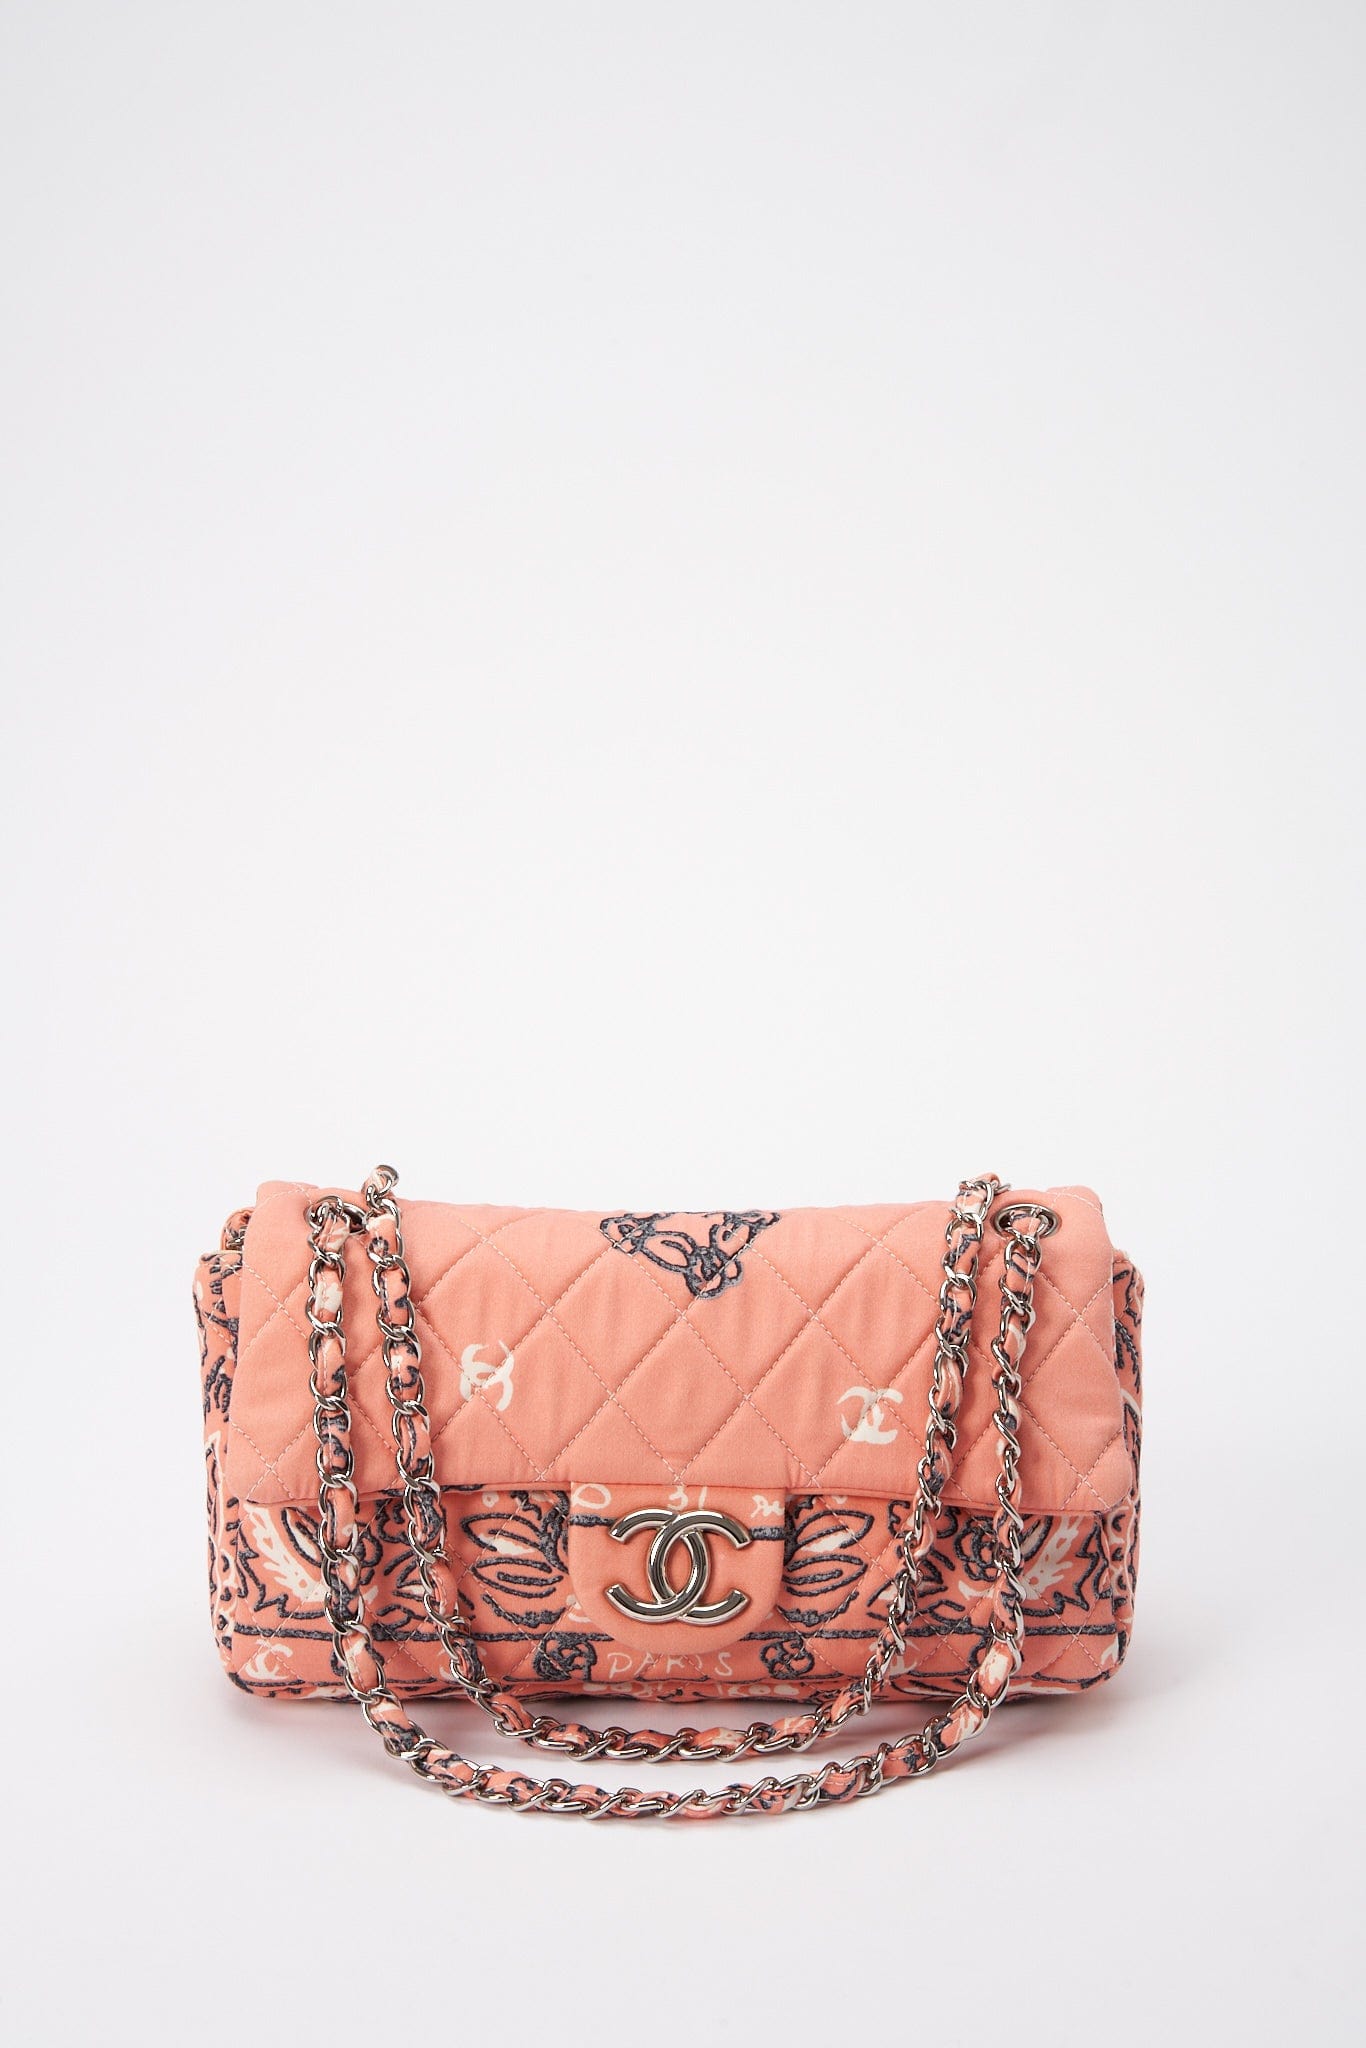 Chanel Monaco Mini Flap Bag: A Touch of Elegance and Luxury 